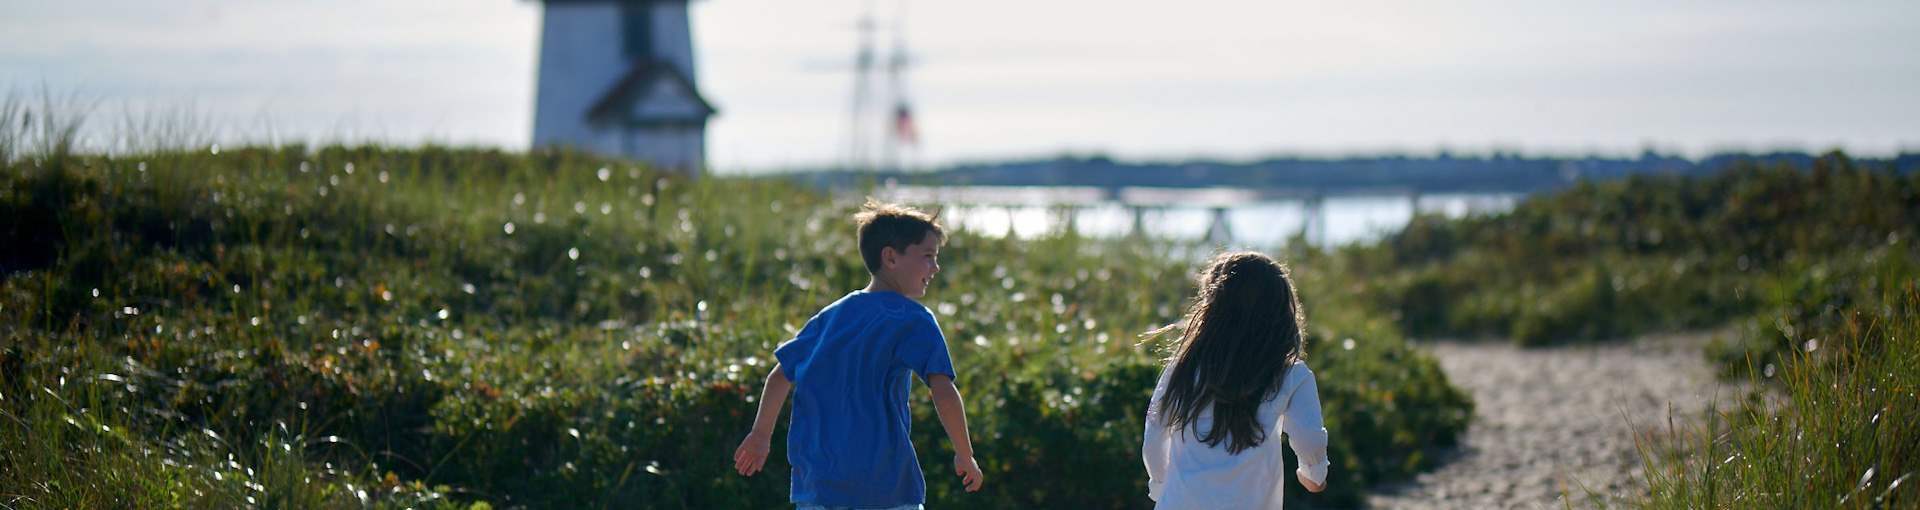 White Elephant Resorts, Nantucket offers Family Vacations